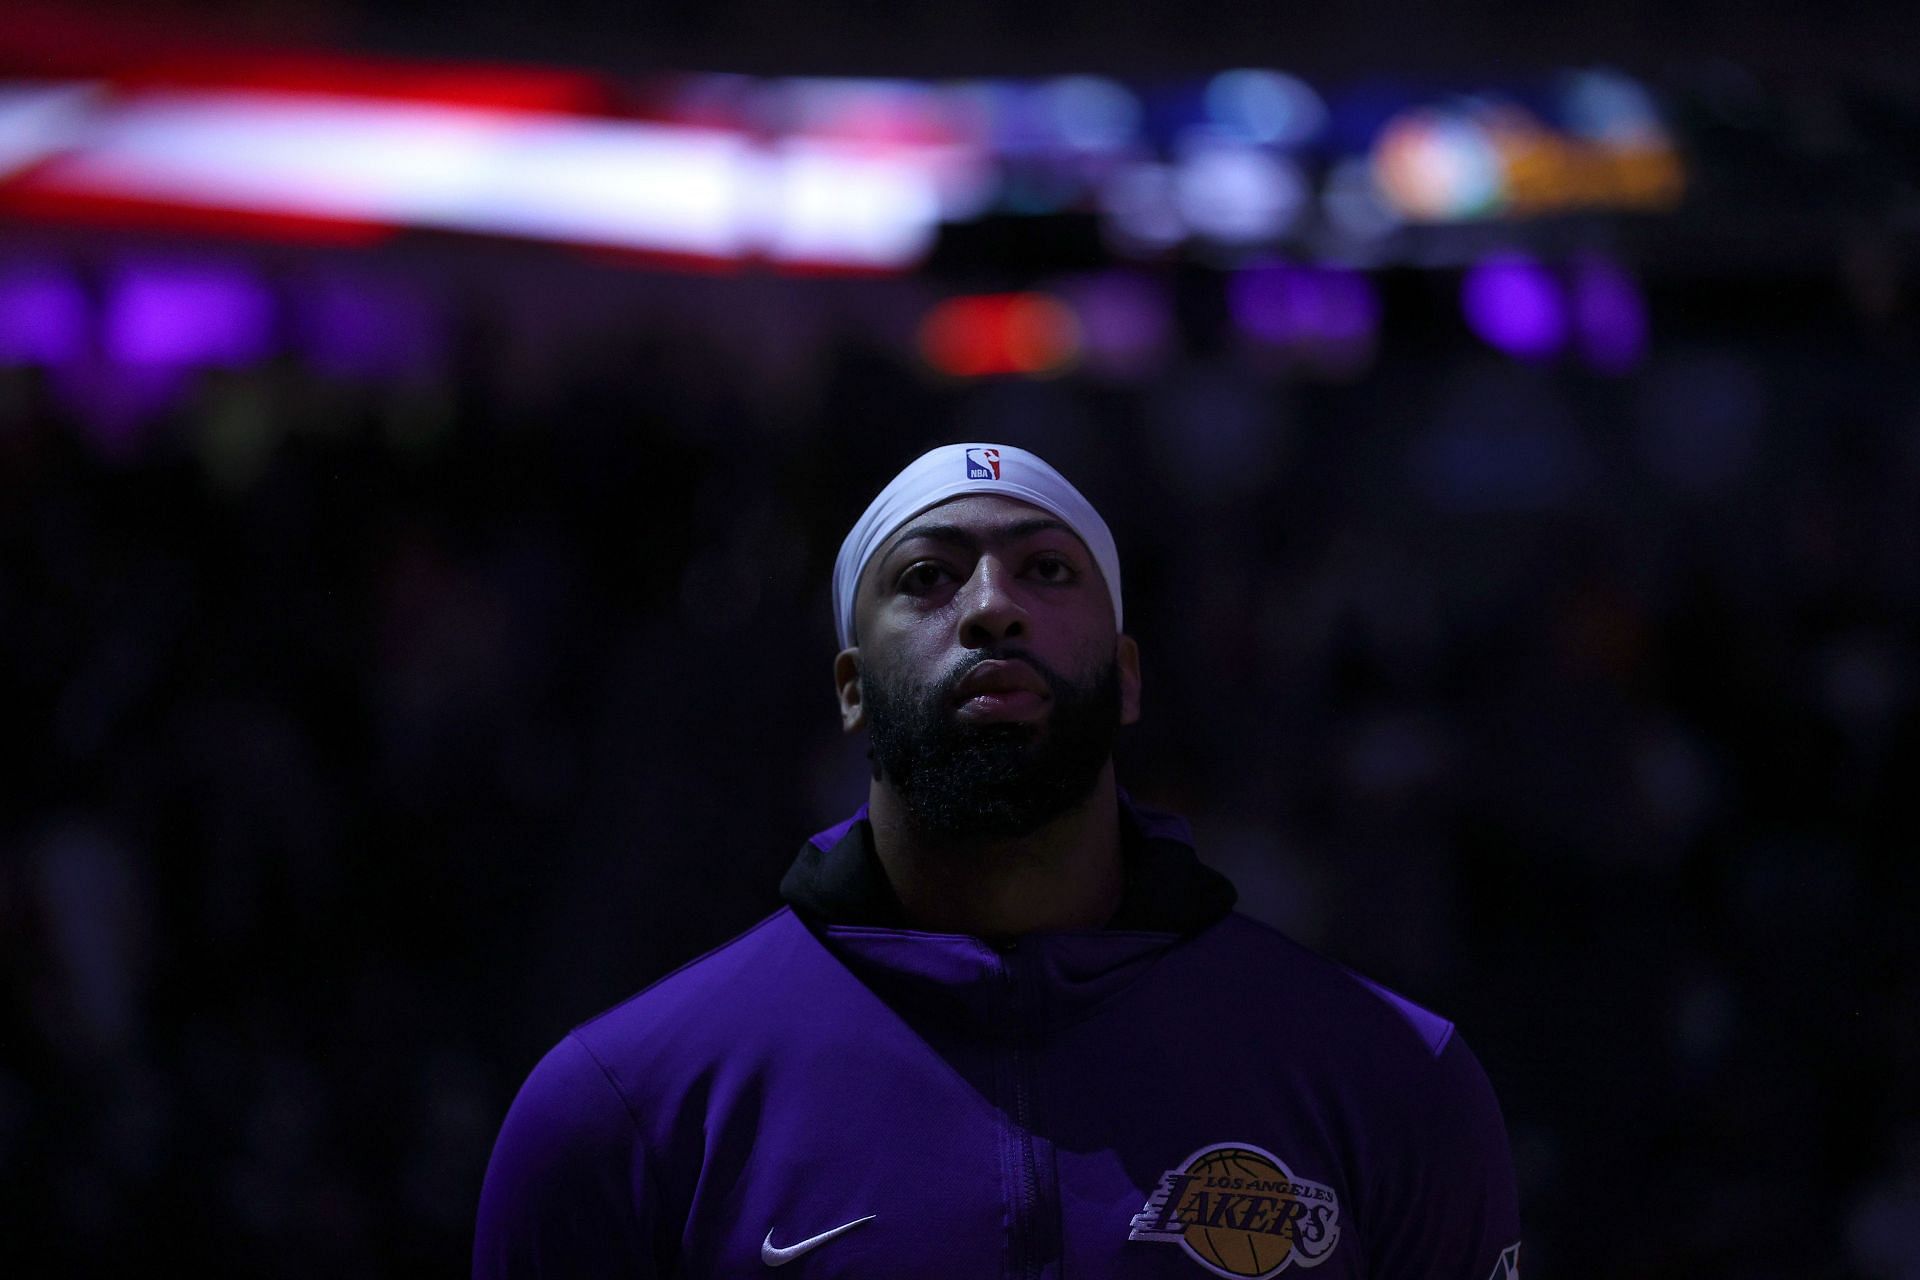 Anthony Davis #3 of the Los Angeles Lakers stands for the national anthem.